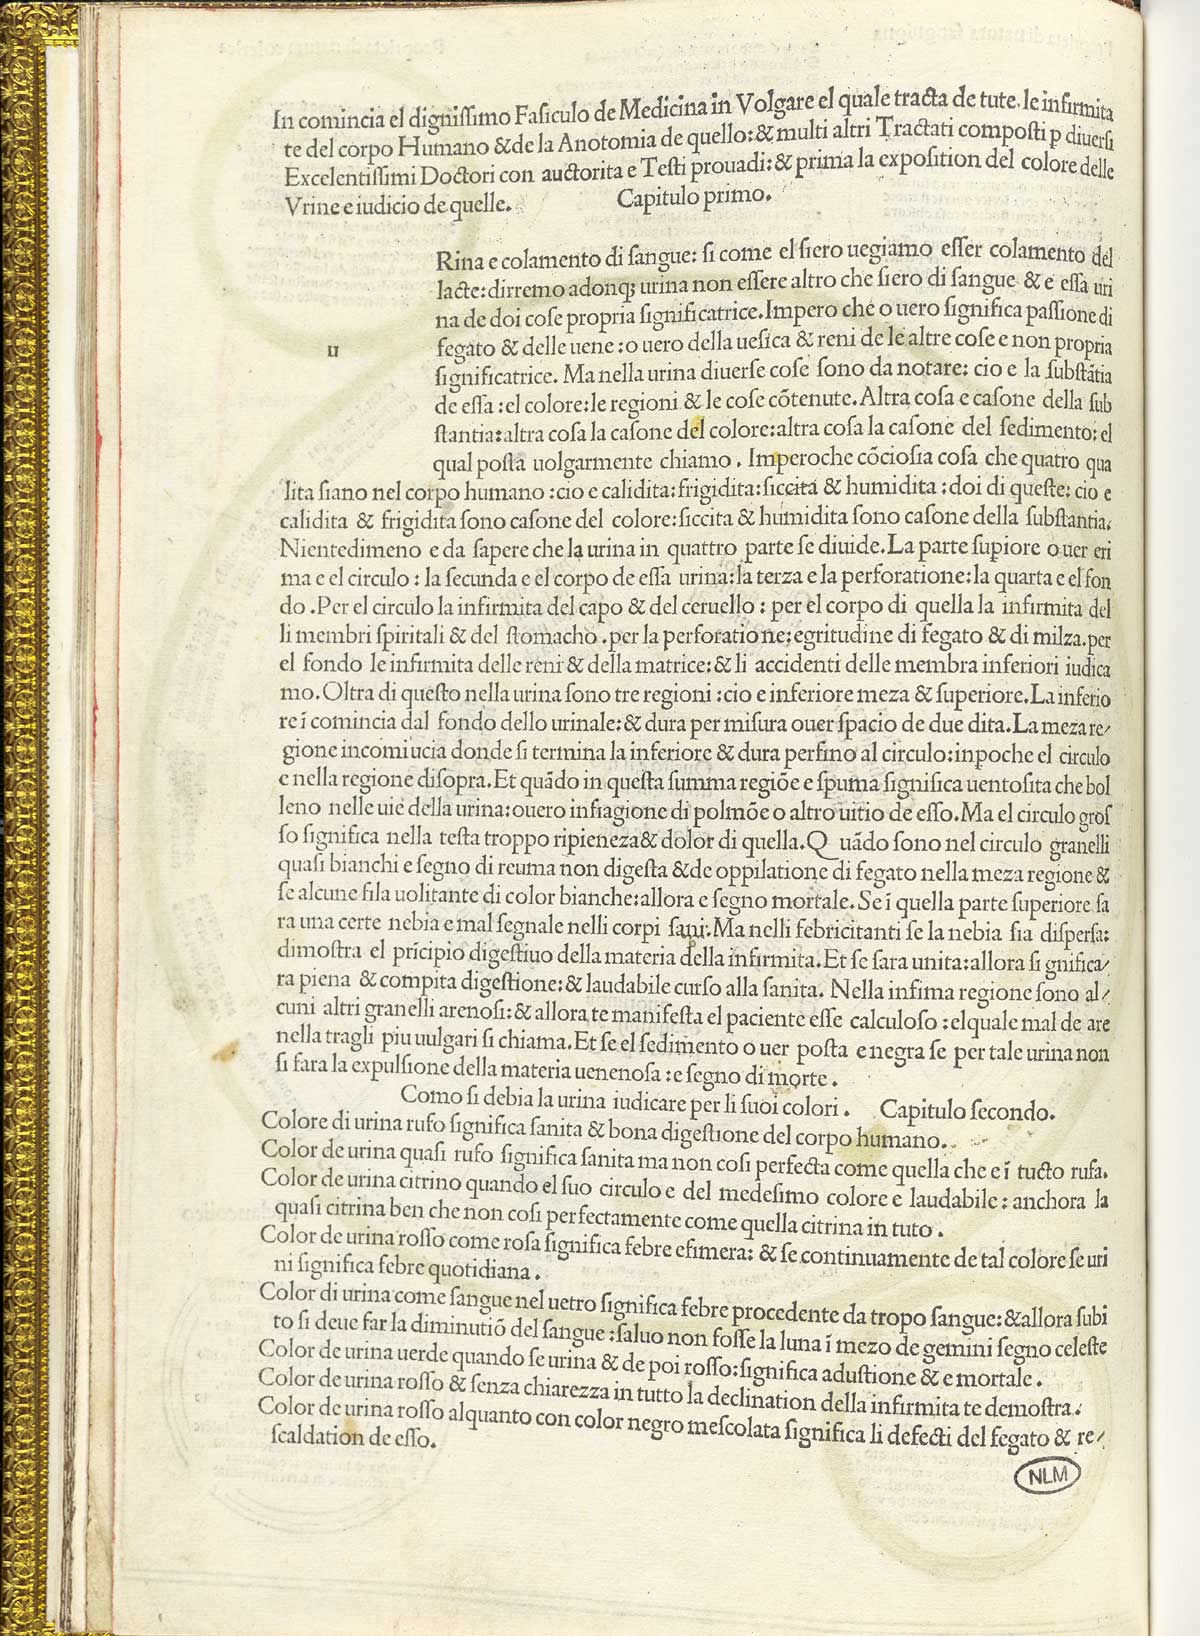 Page 4 of Johannes de Ketham's Fasiculo de medicina dealing with urine. At the bottom right corner of the page is the NLM stamp.